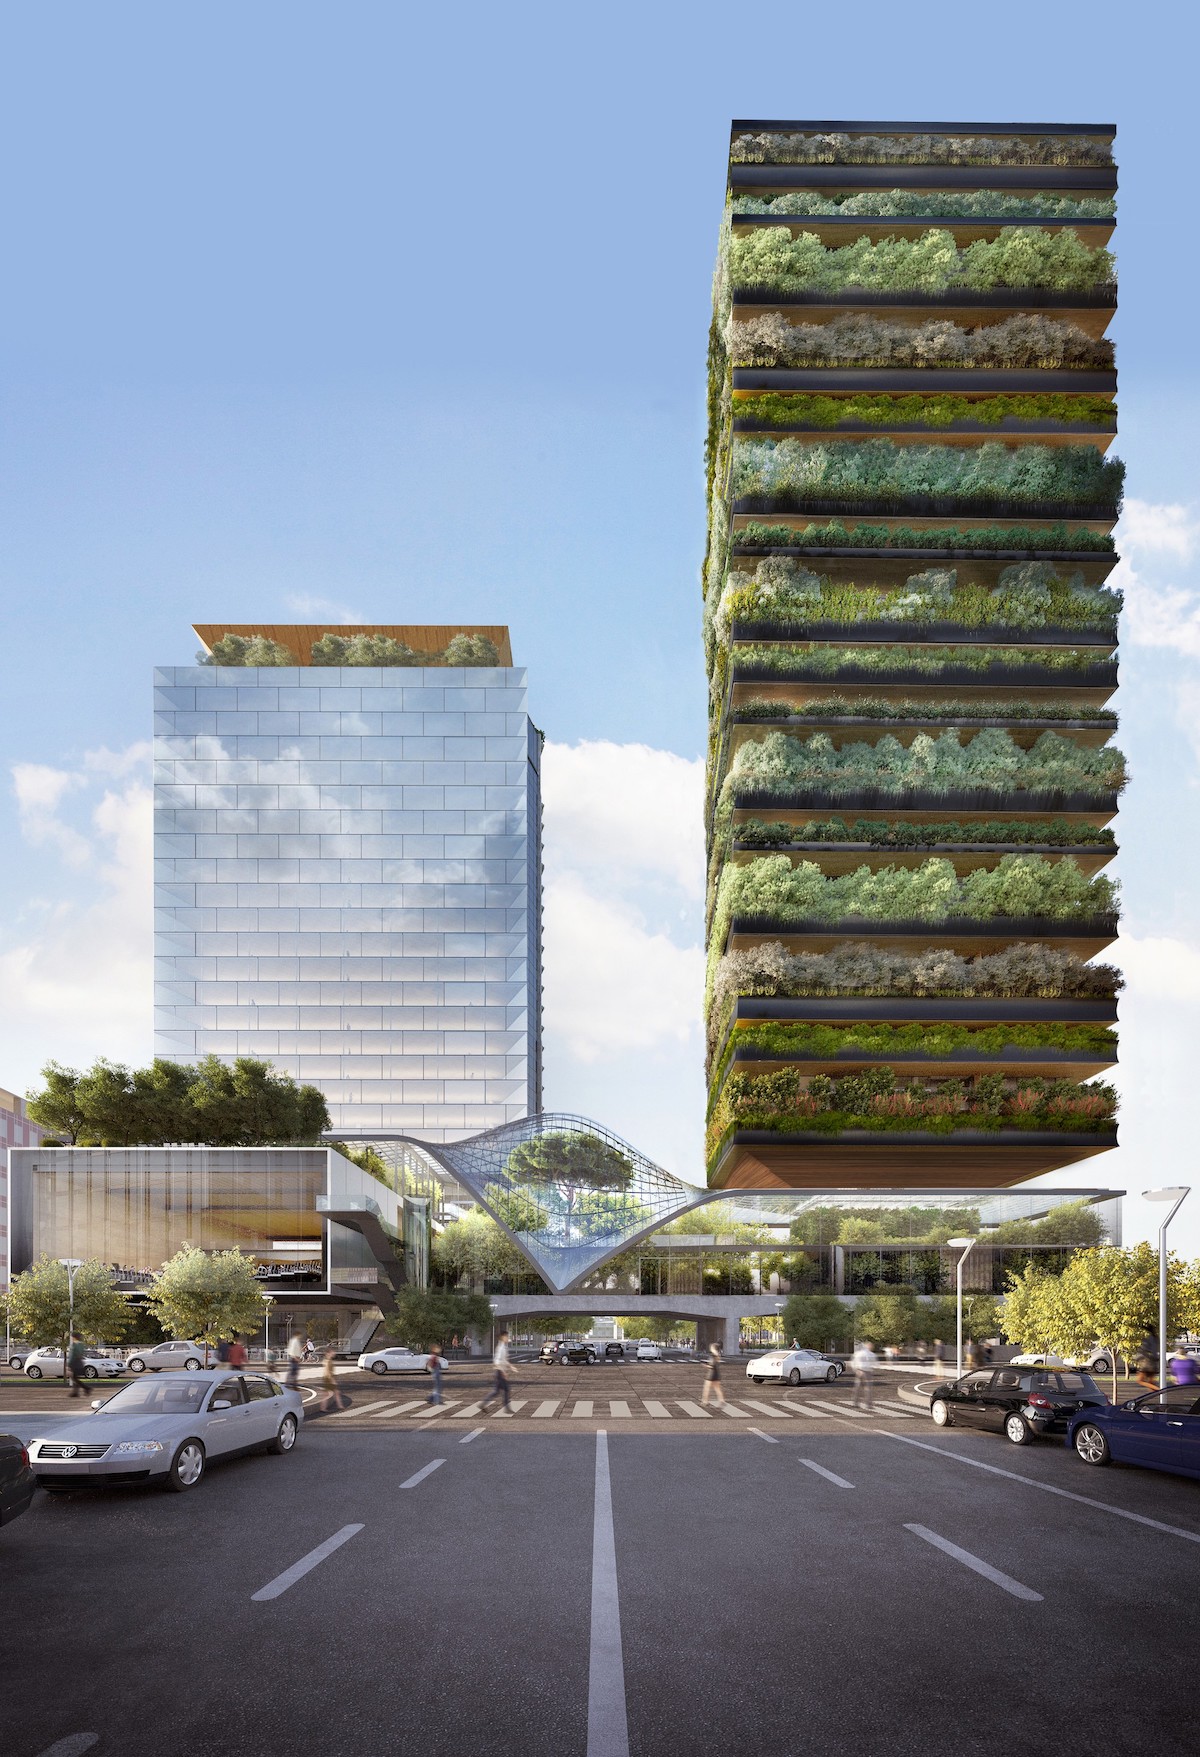 Diller Scofidio + Renfro and Stefano Boeri Architetti Win Competition for Botanical Tower in Milan